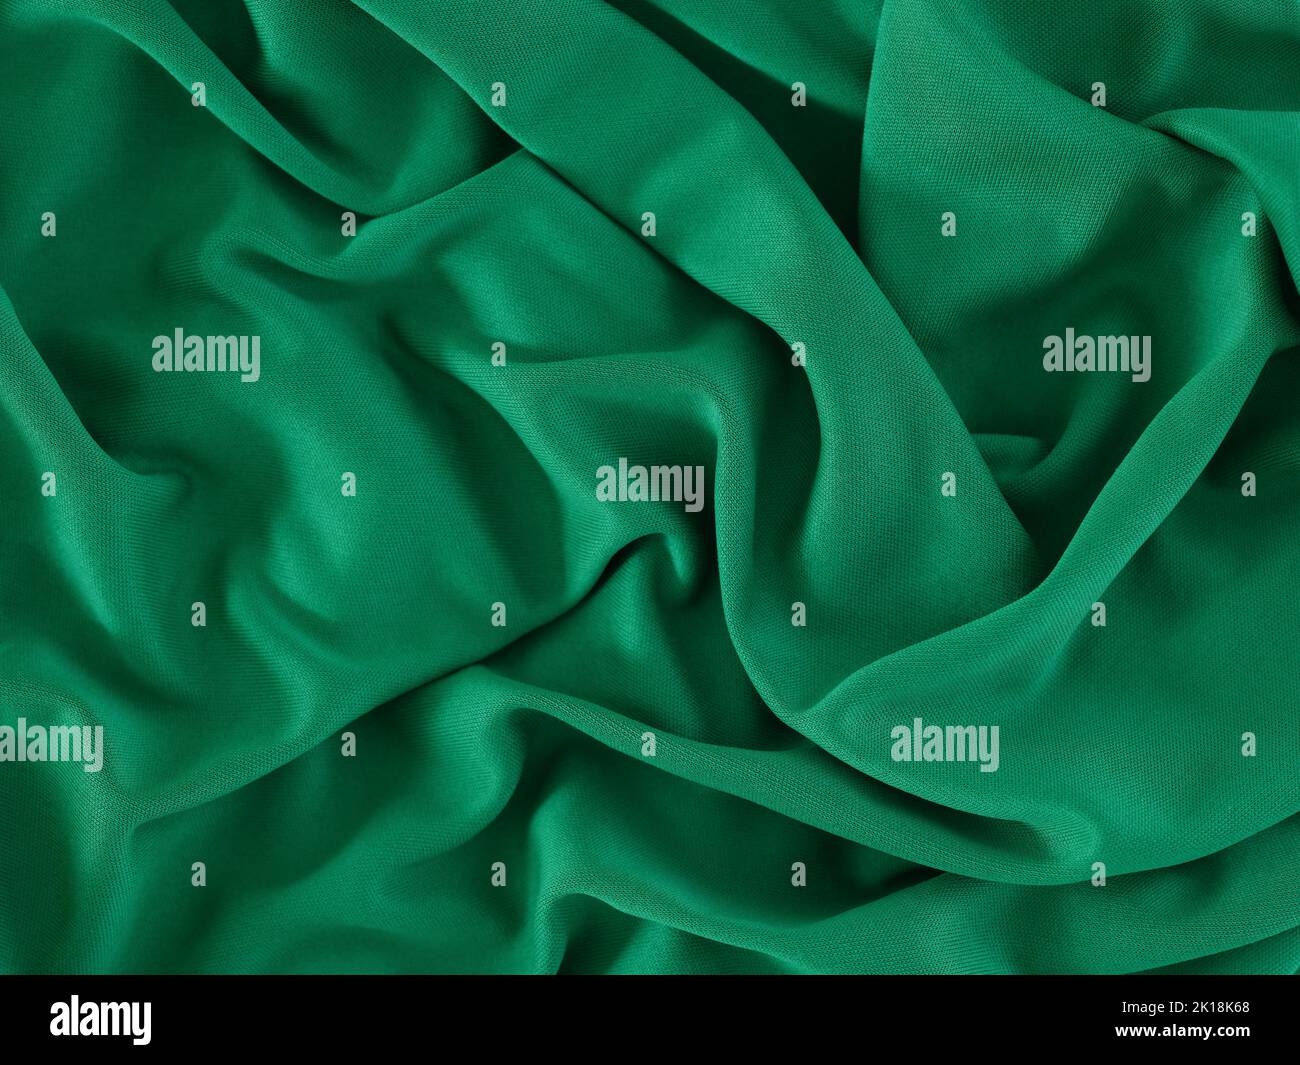 A crumpled green fabric background. Close up. Stock Photo